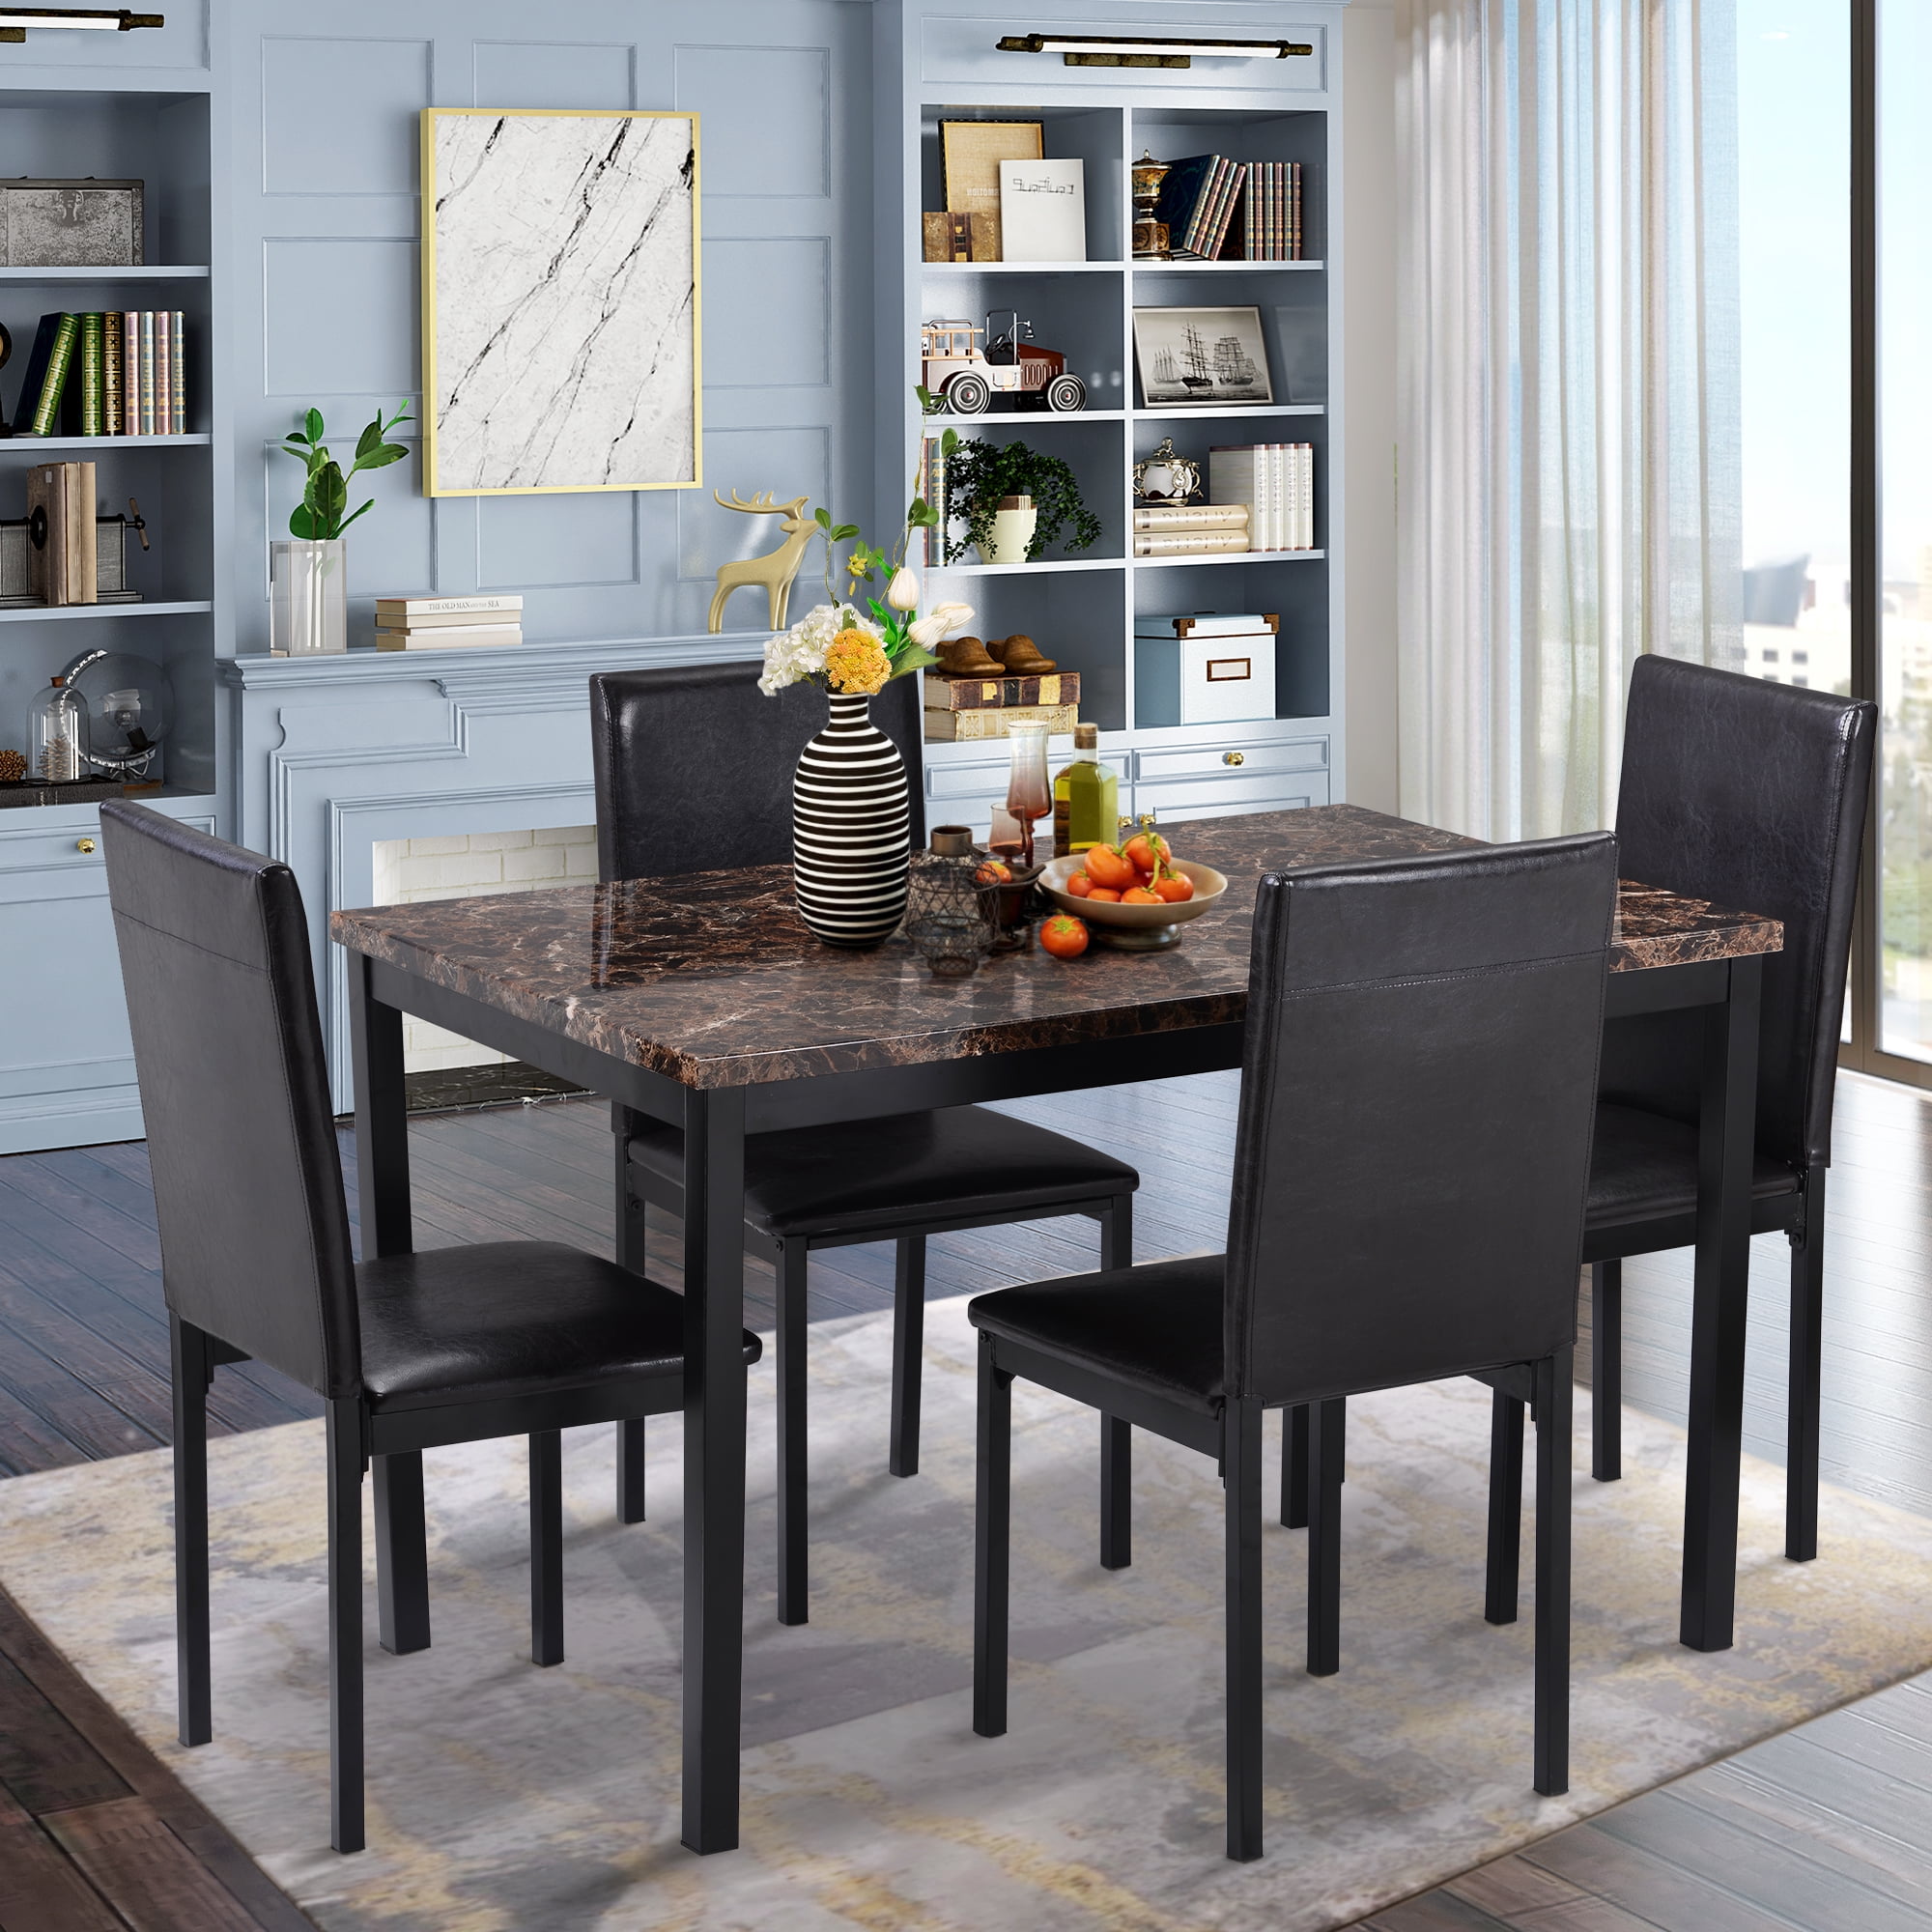 Faux Marble Rectangular Breakfast Table, Dining Room Table Sets With Upholstered Chairs